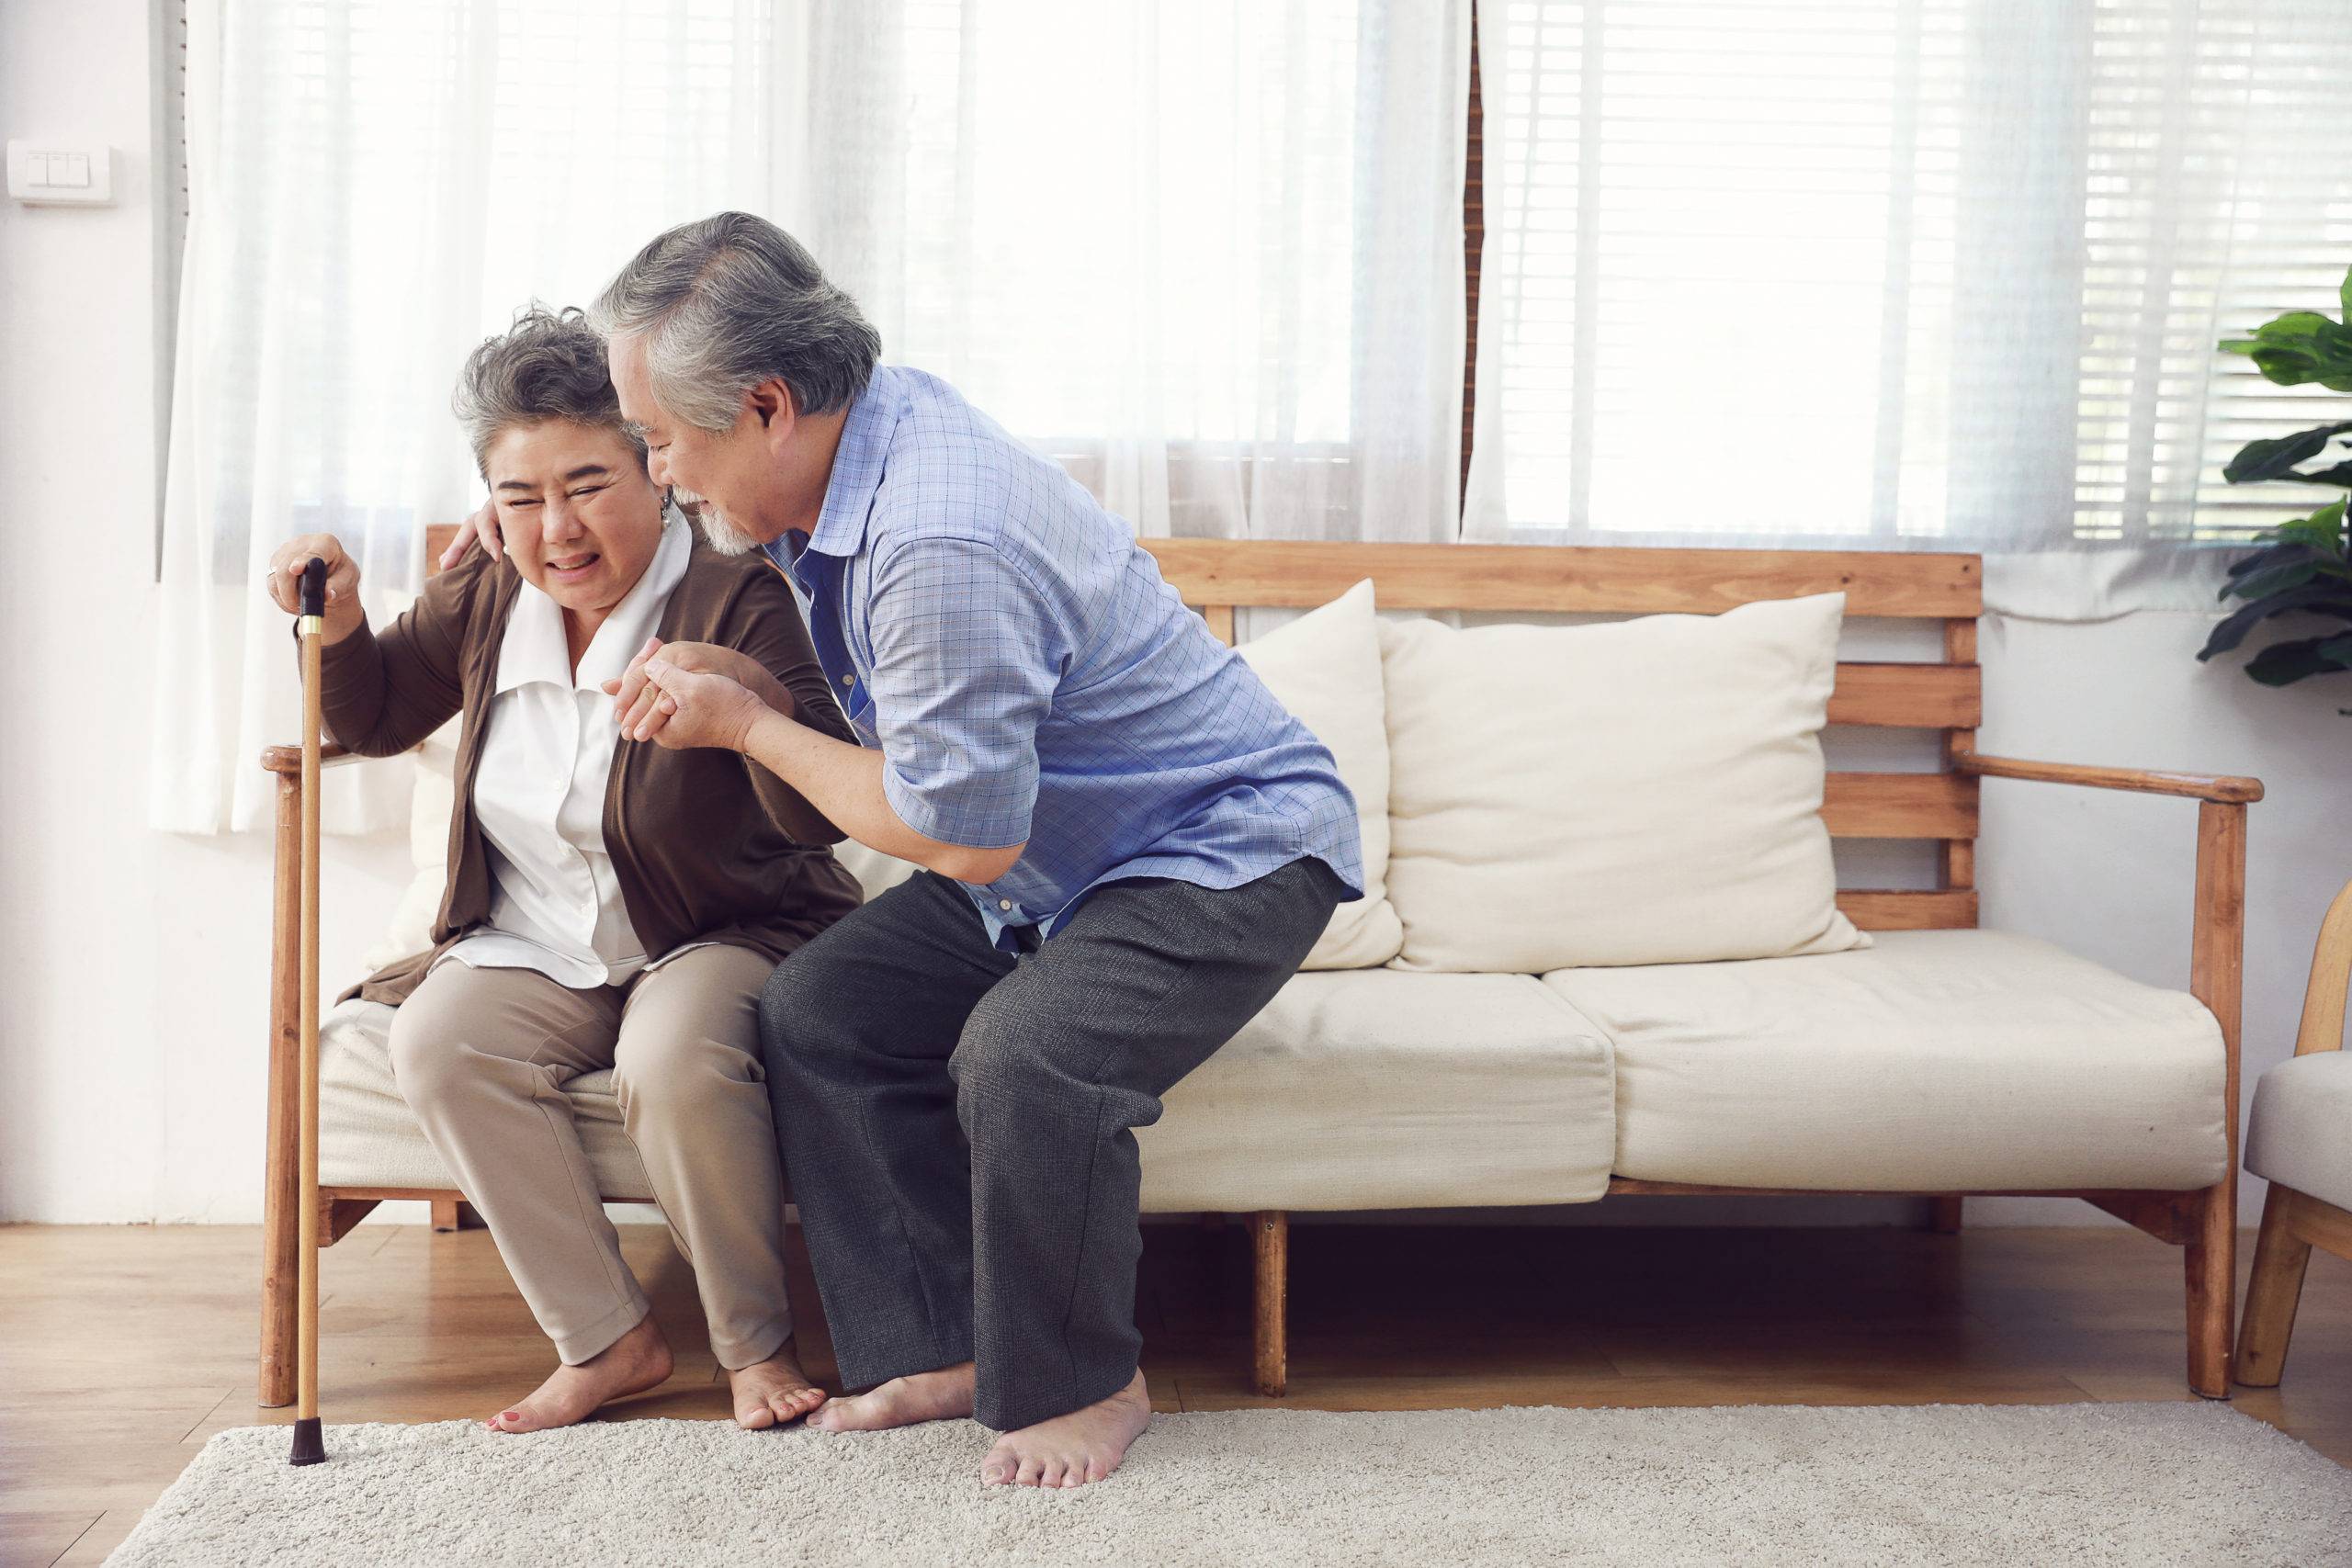 Elderly couple standing up from couch, woman using cane